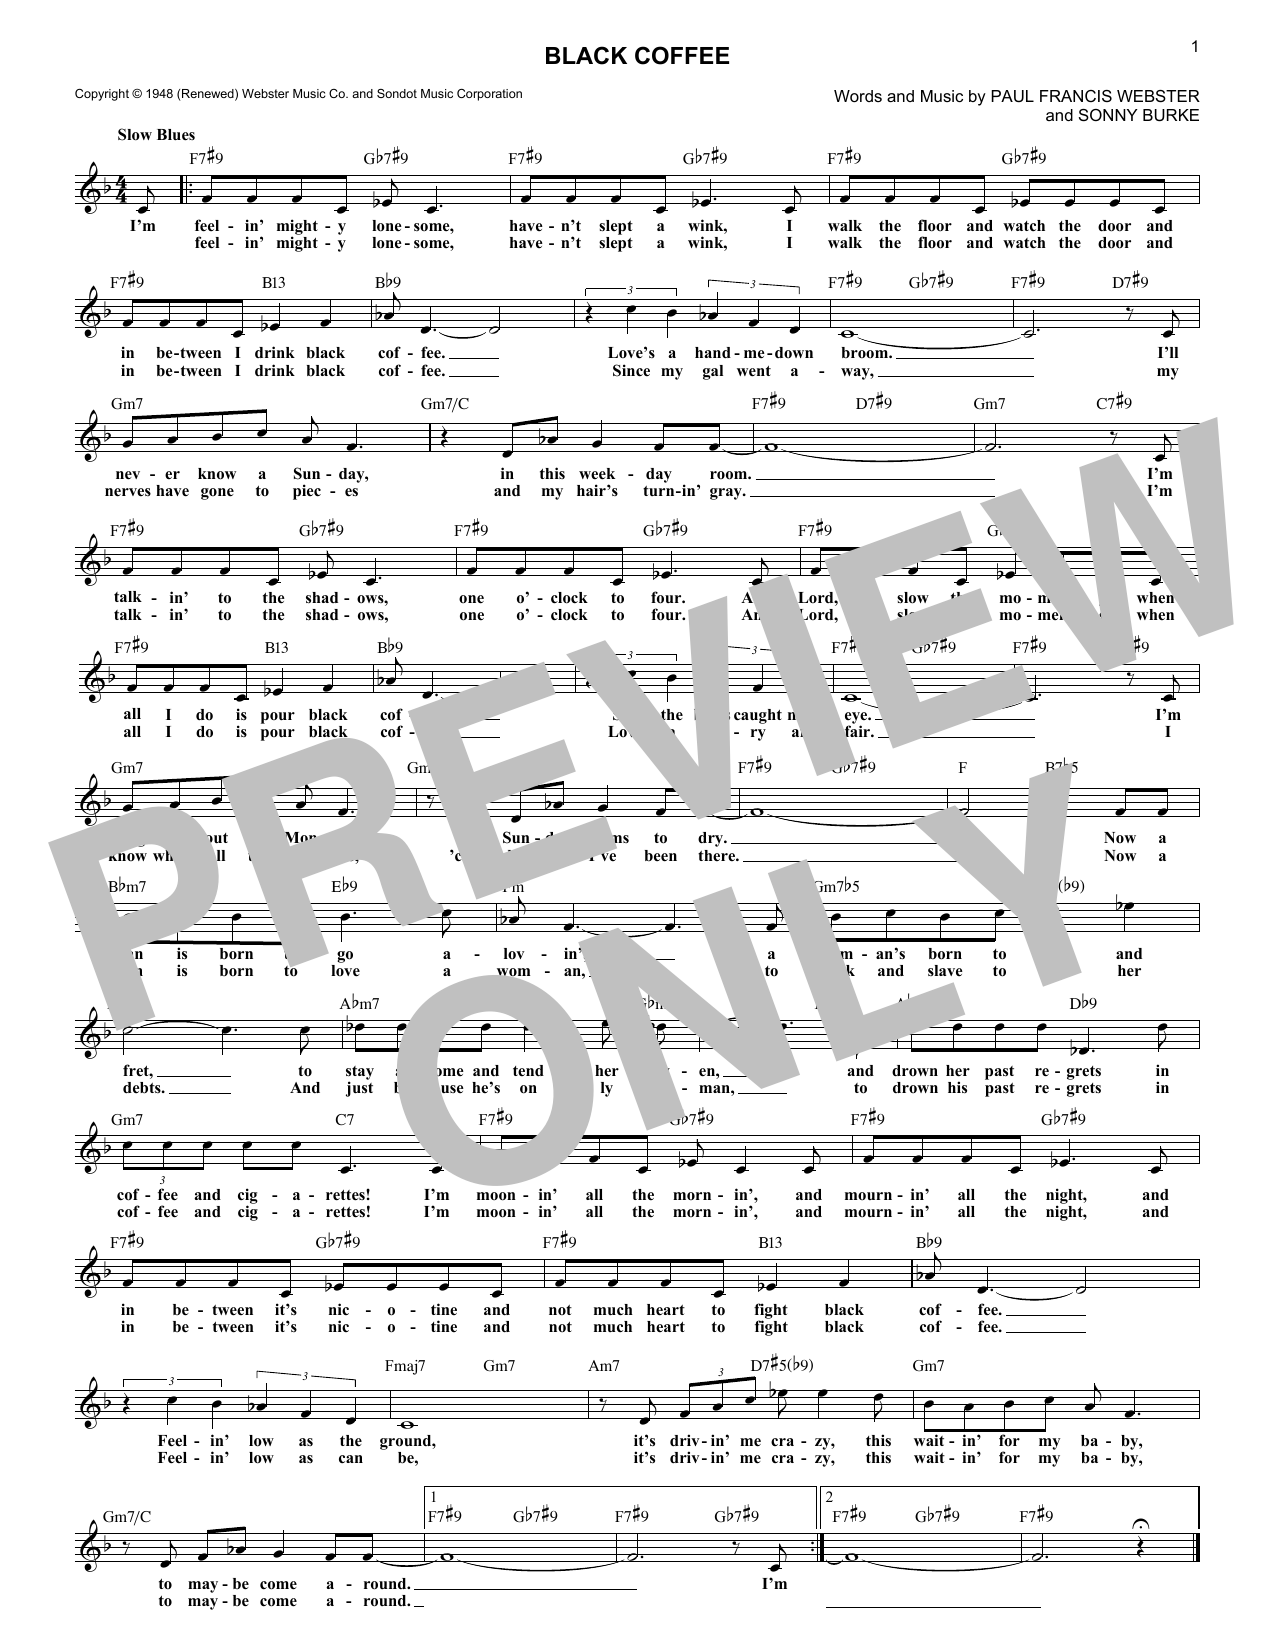 Sonny Burke Black Coffee sheet music notes and chords. Download Printable PDF.